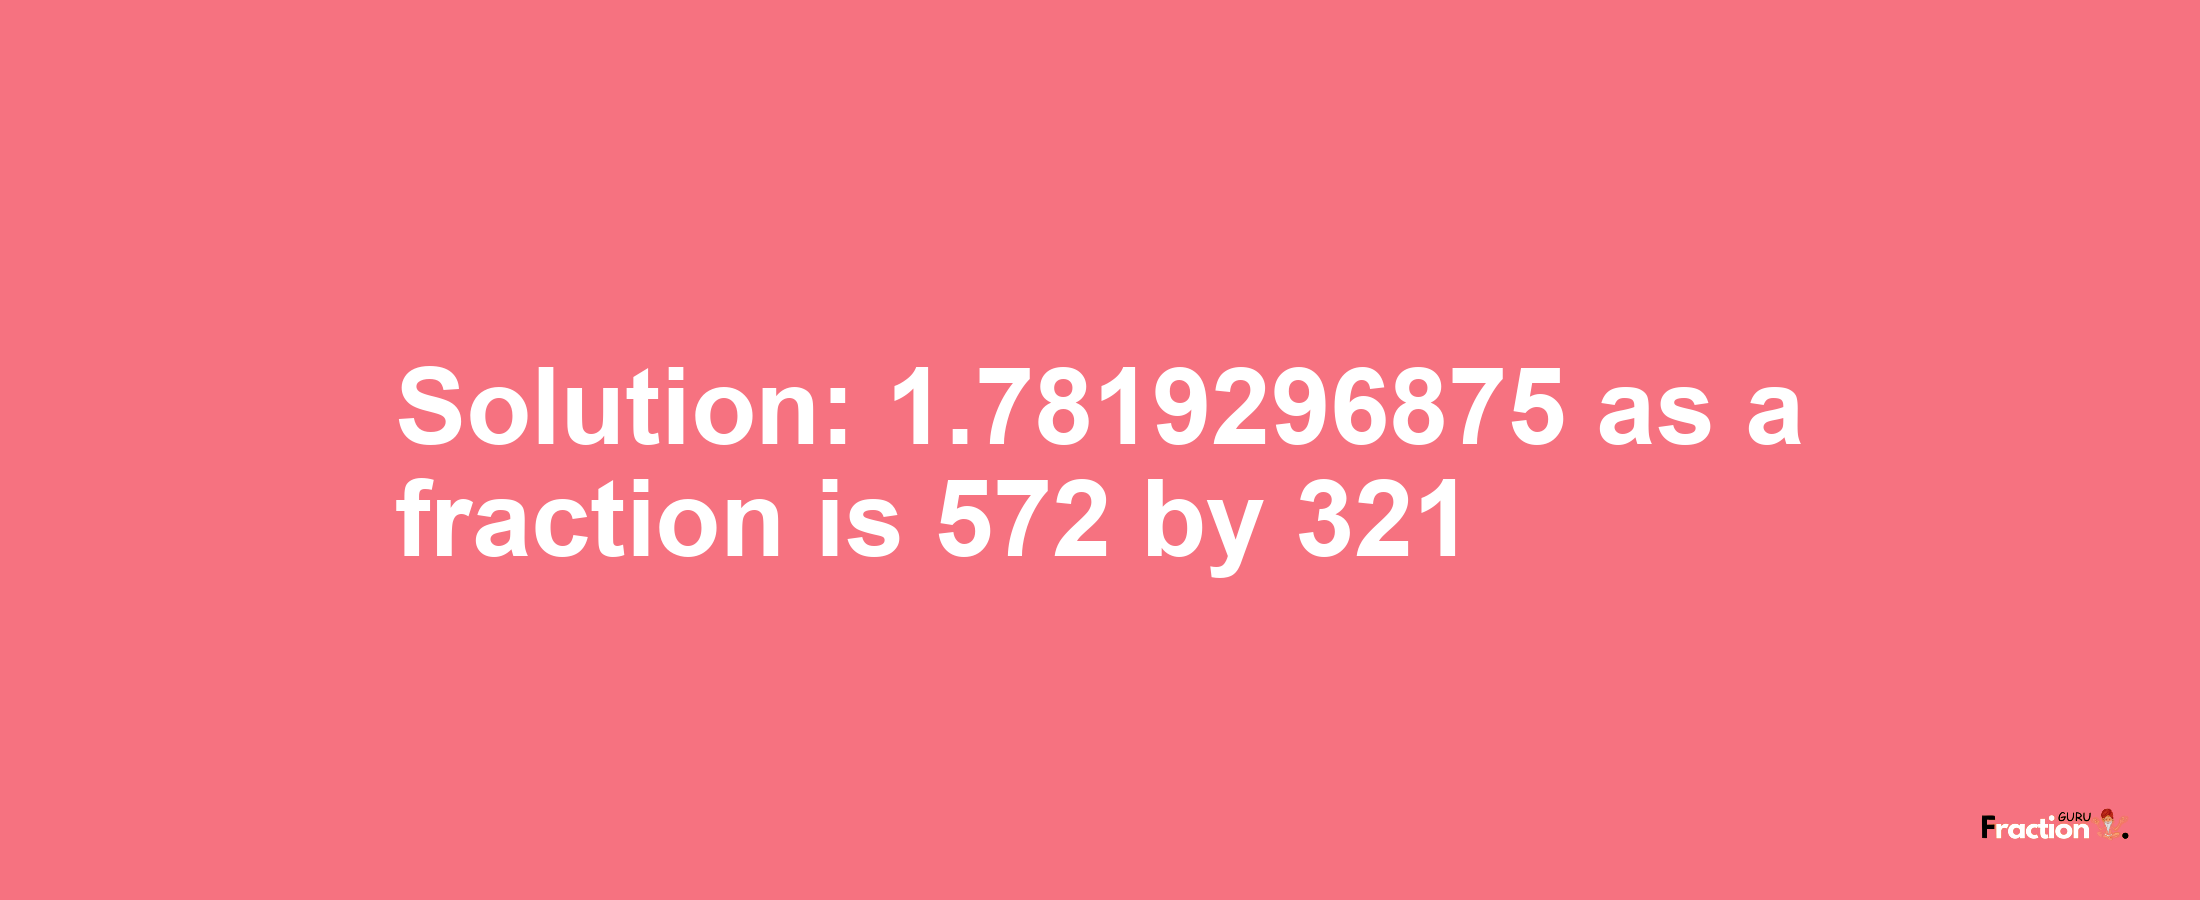 Solution:1.7819296875 as a fraction is 572/321